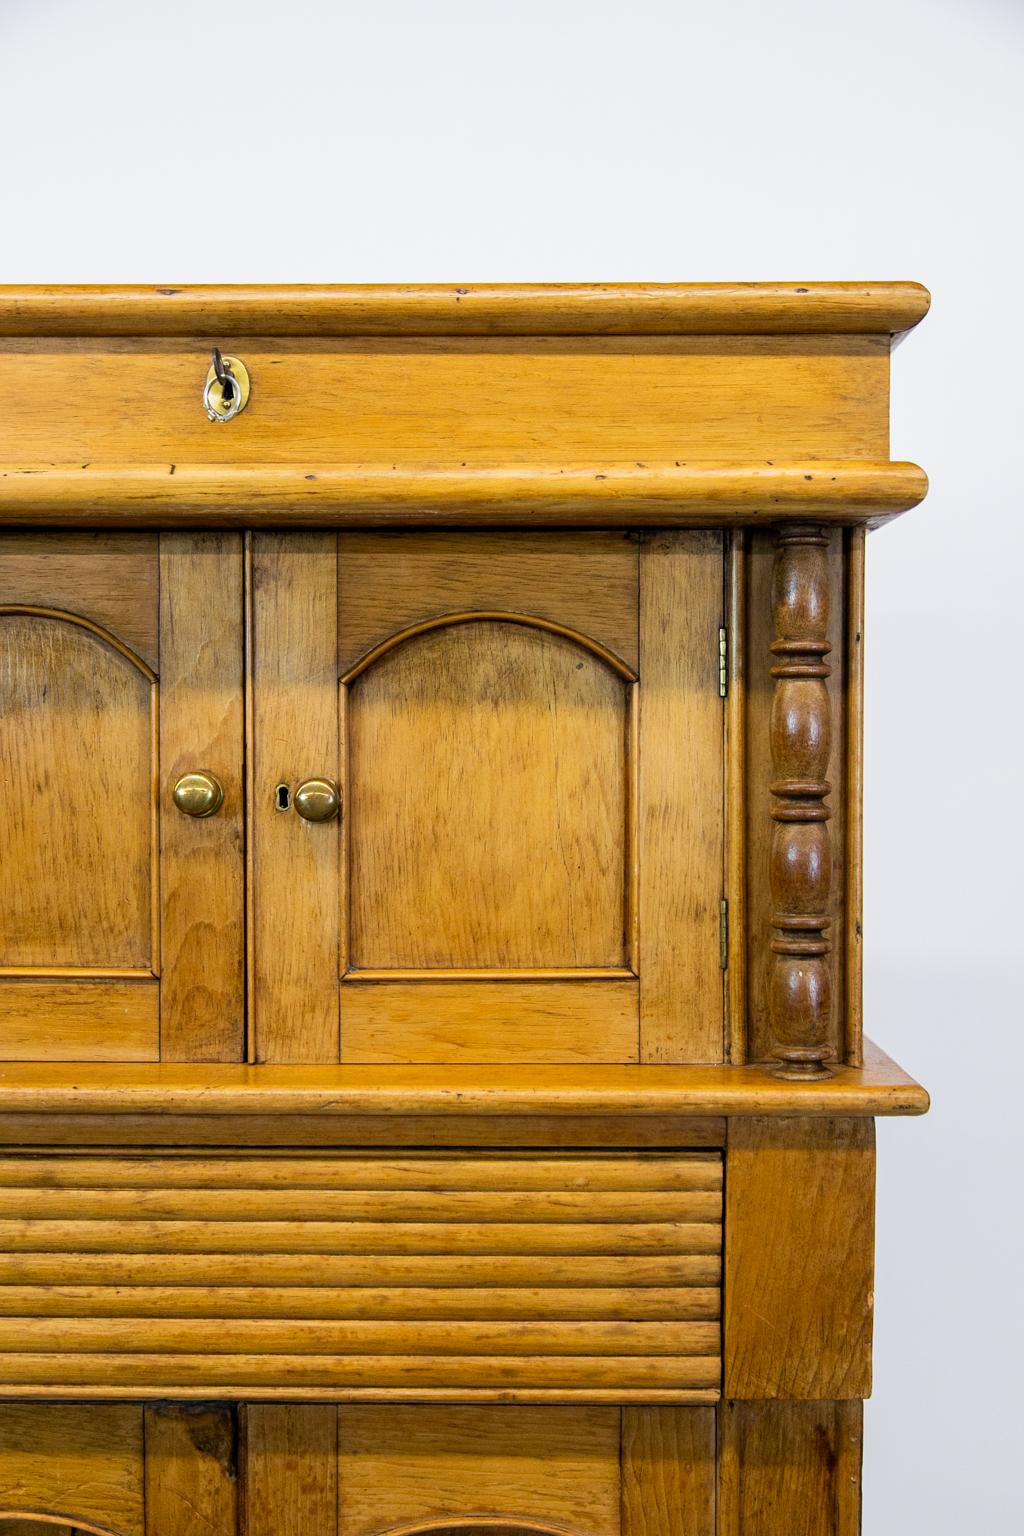 This very unusual English pine cupboard is one of a kind. There is a lift top compartment that is 3 1/2” deep and has its original working lock and key. It has bull nosed moldings on the top section. The top and bottom doors have arched recessed